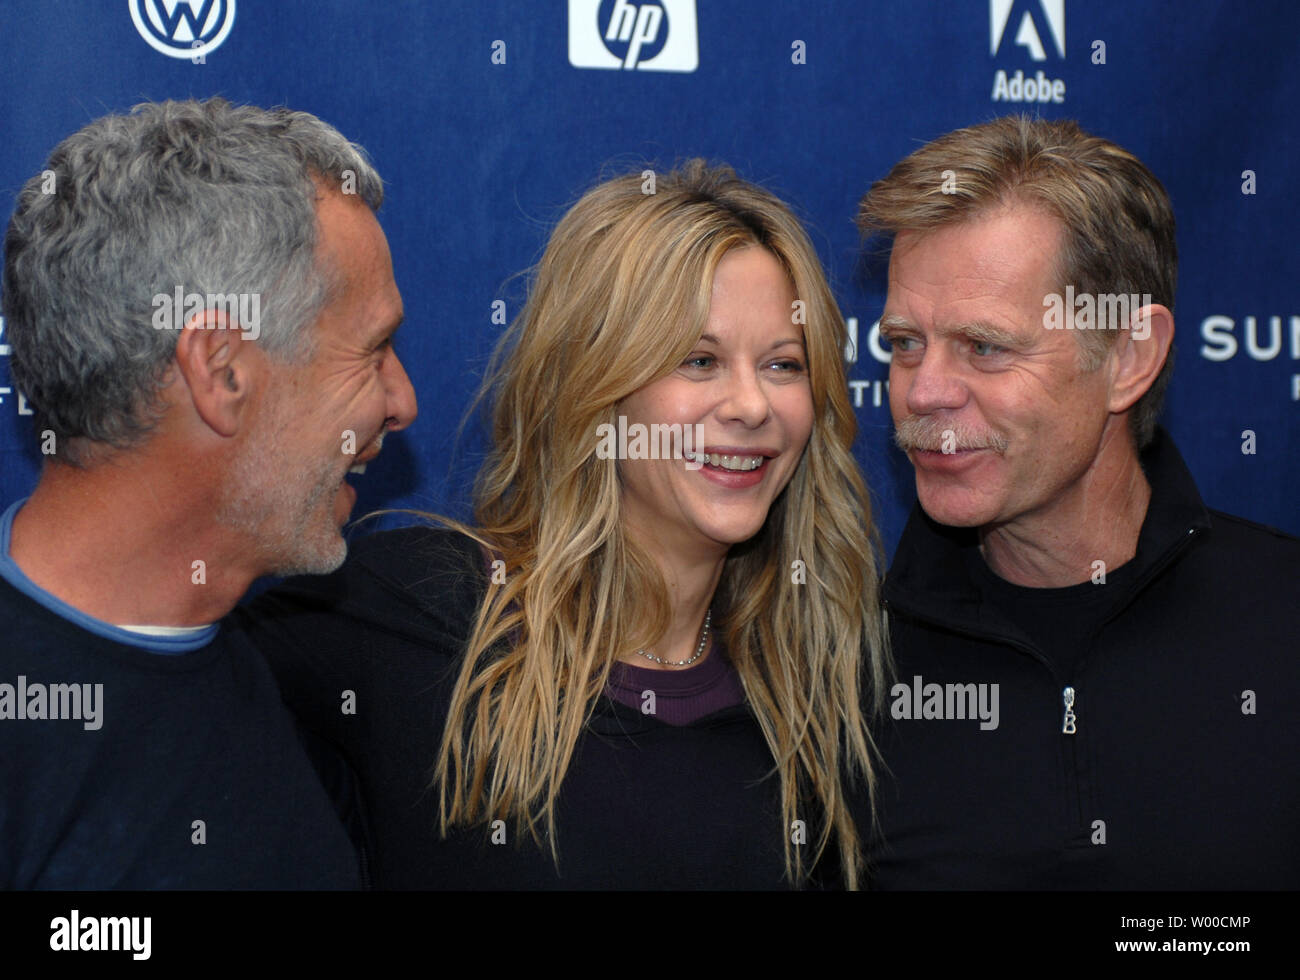 Director/screenwriter Steven Schachter, actress Meg Ryan, and screenwriter/actor William H. Macy (L to R) Stock Photo